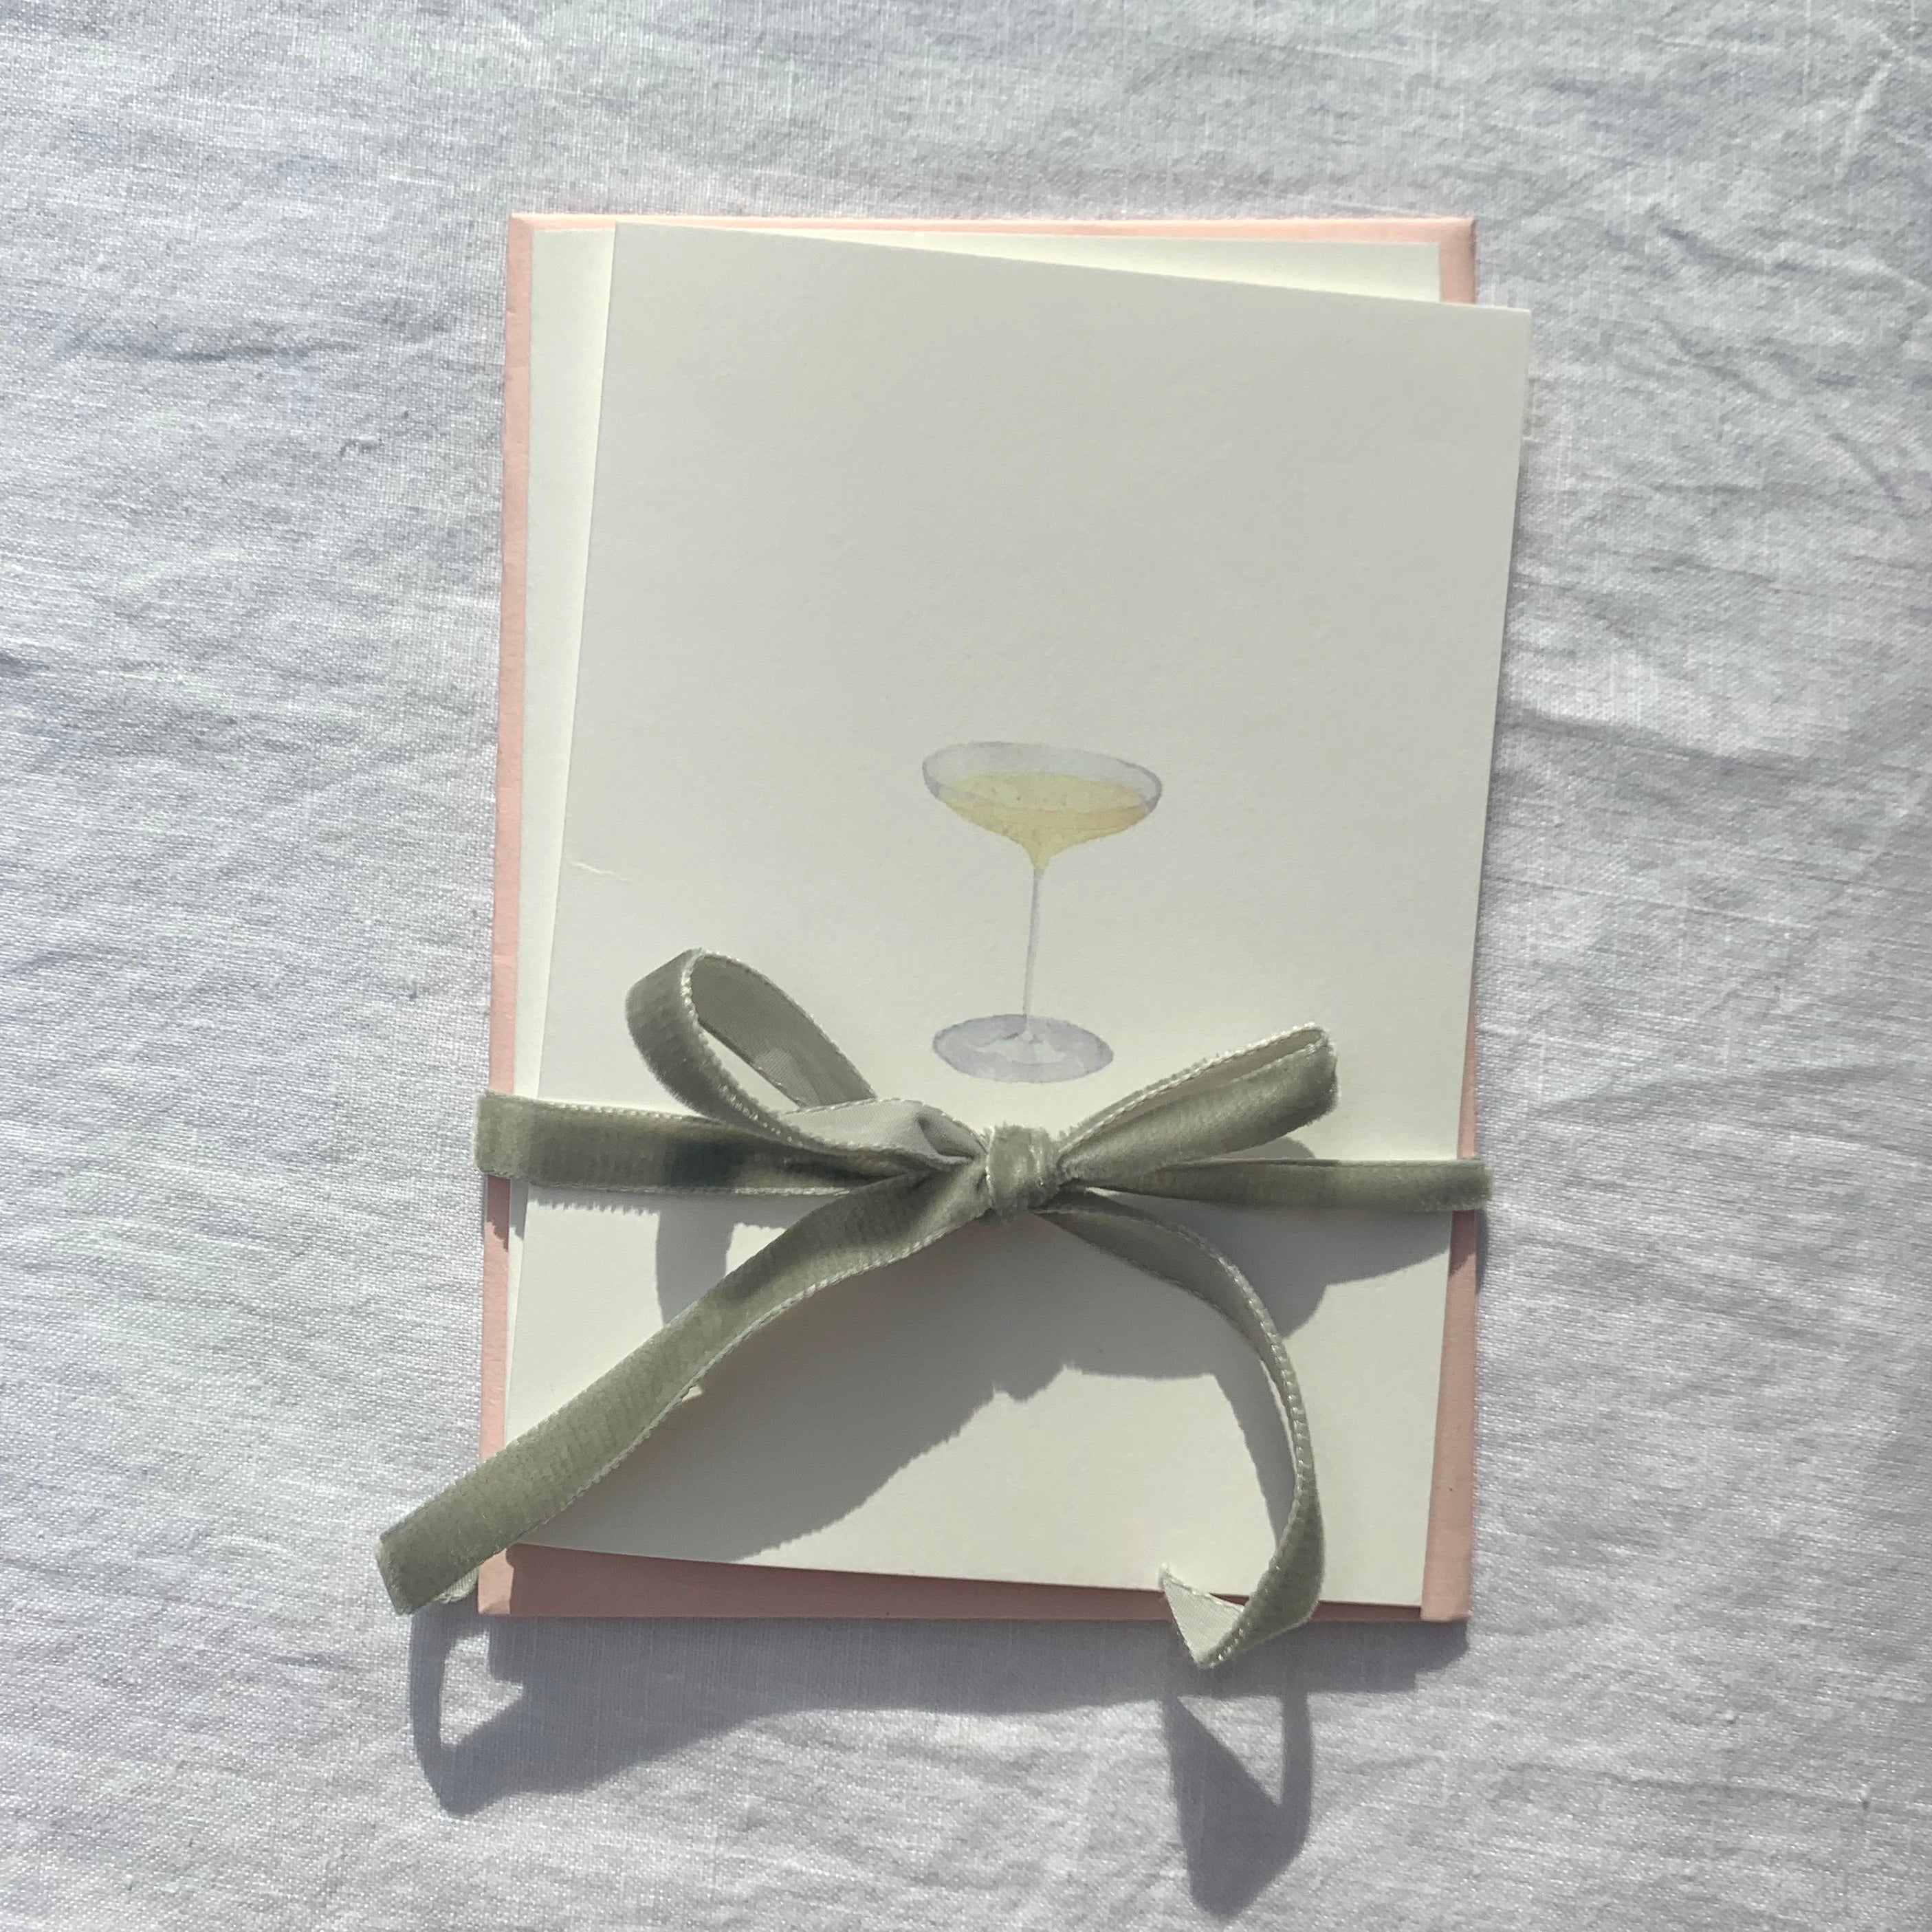 Champagne coupe greetings card by Memo Press